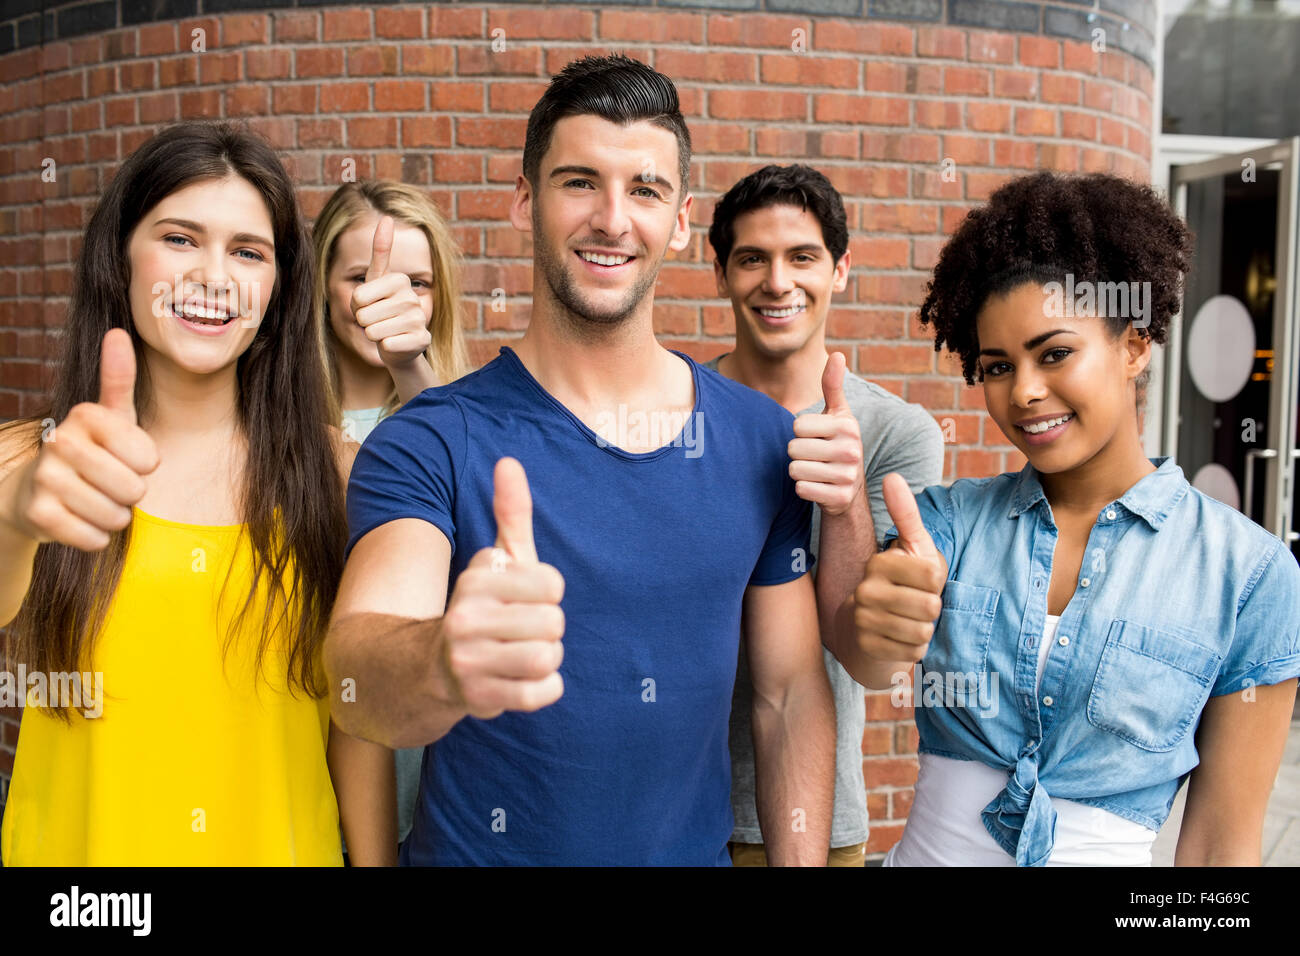 Students all showing thumbs up together Stock Photo